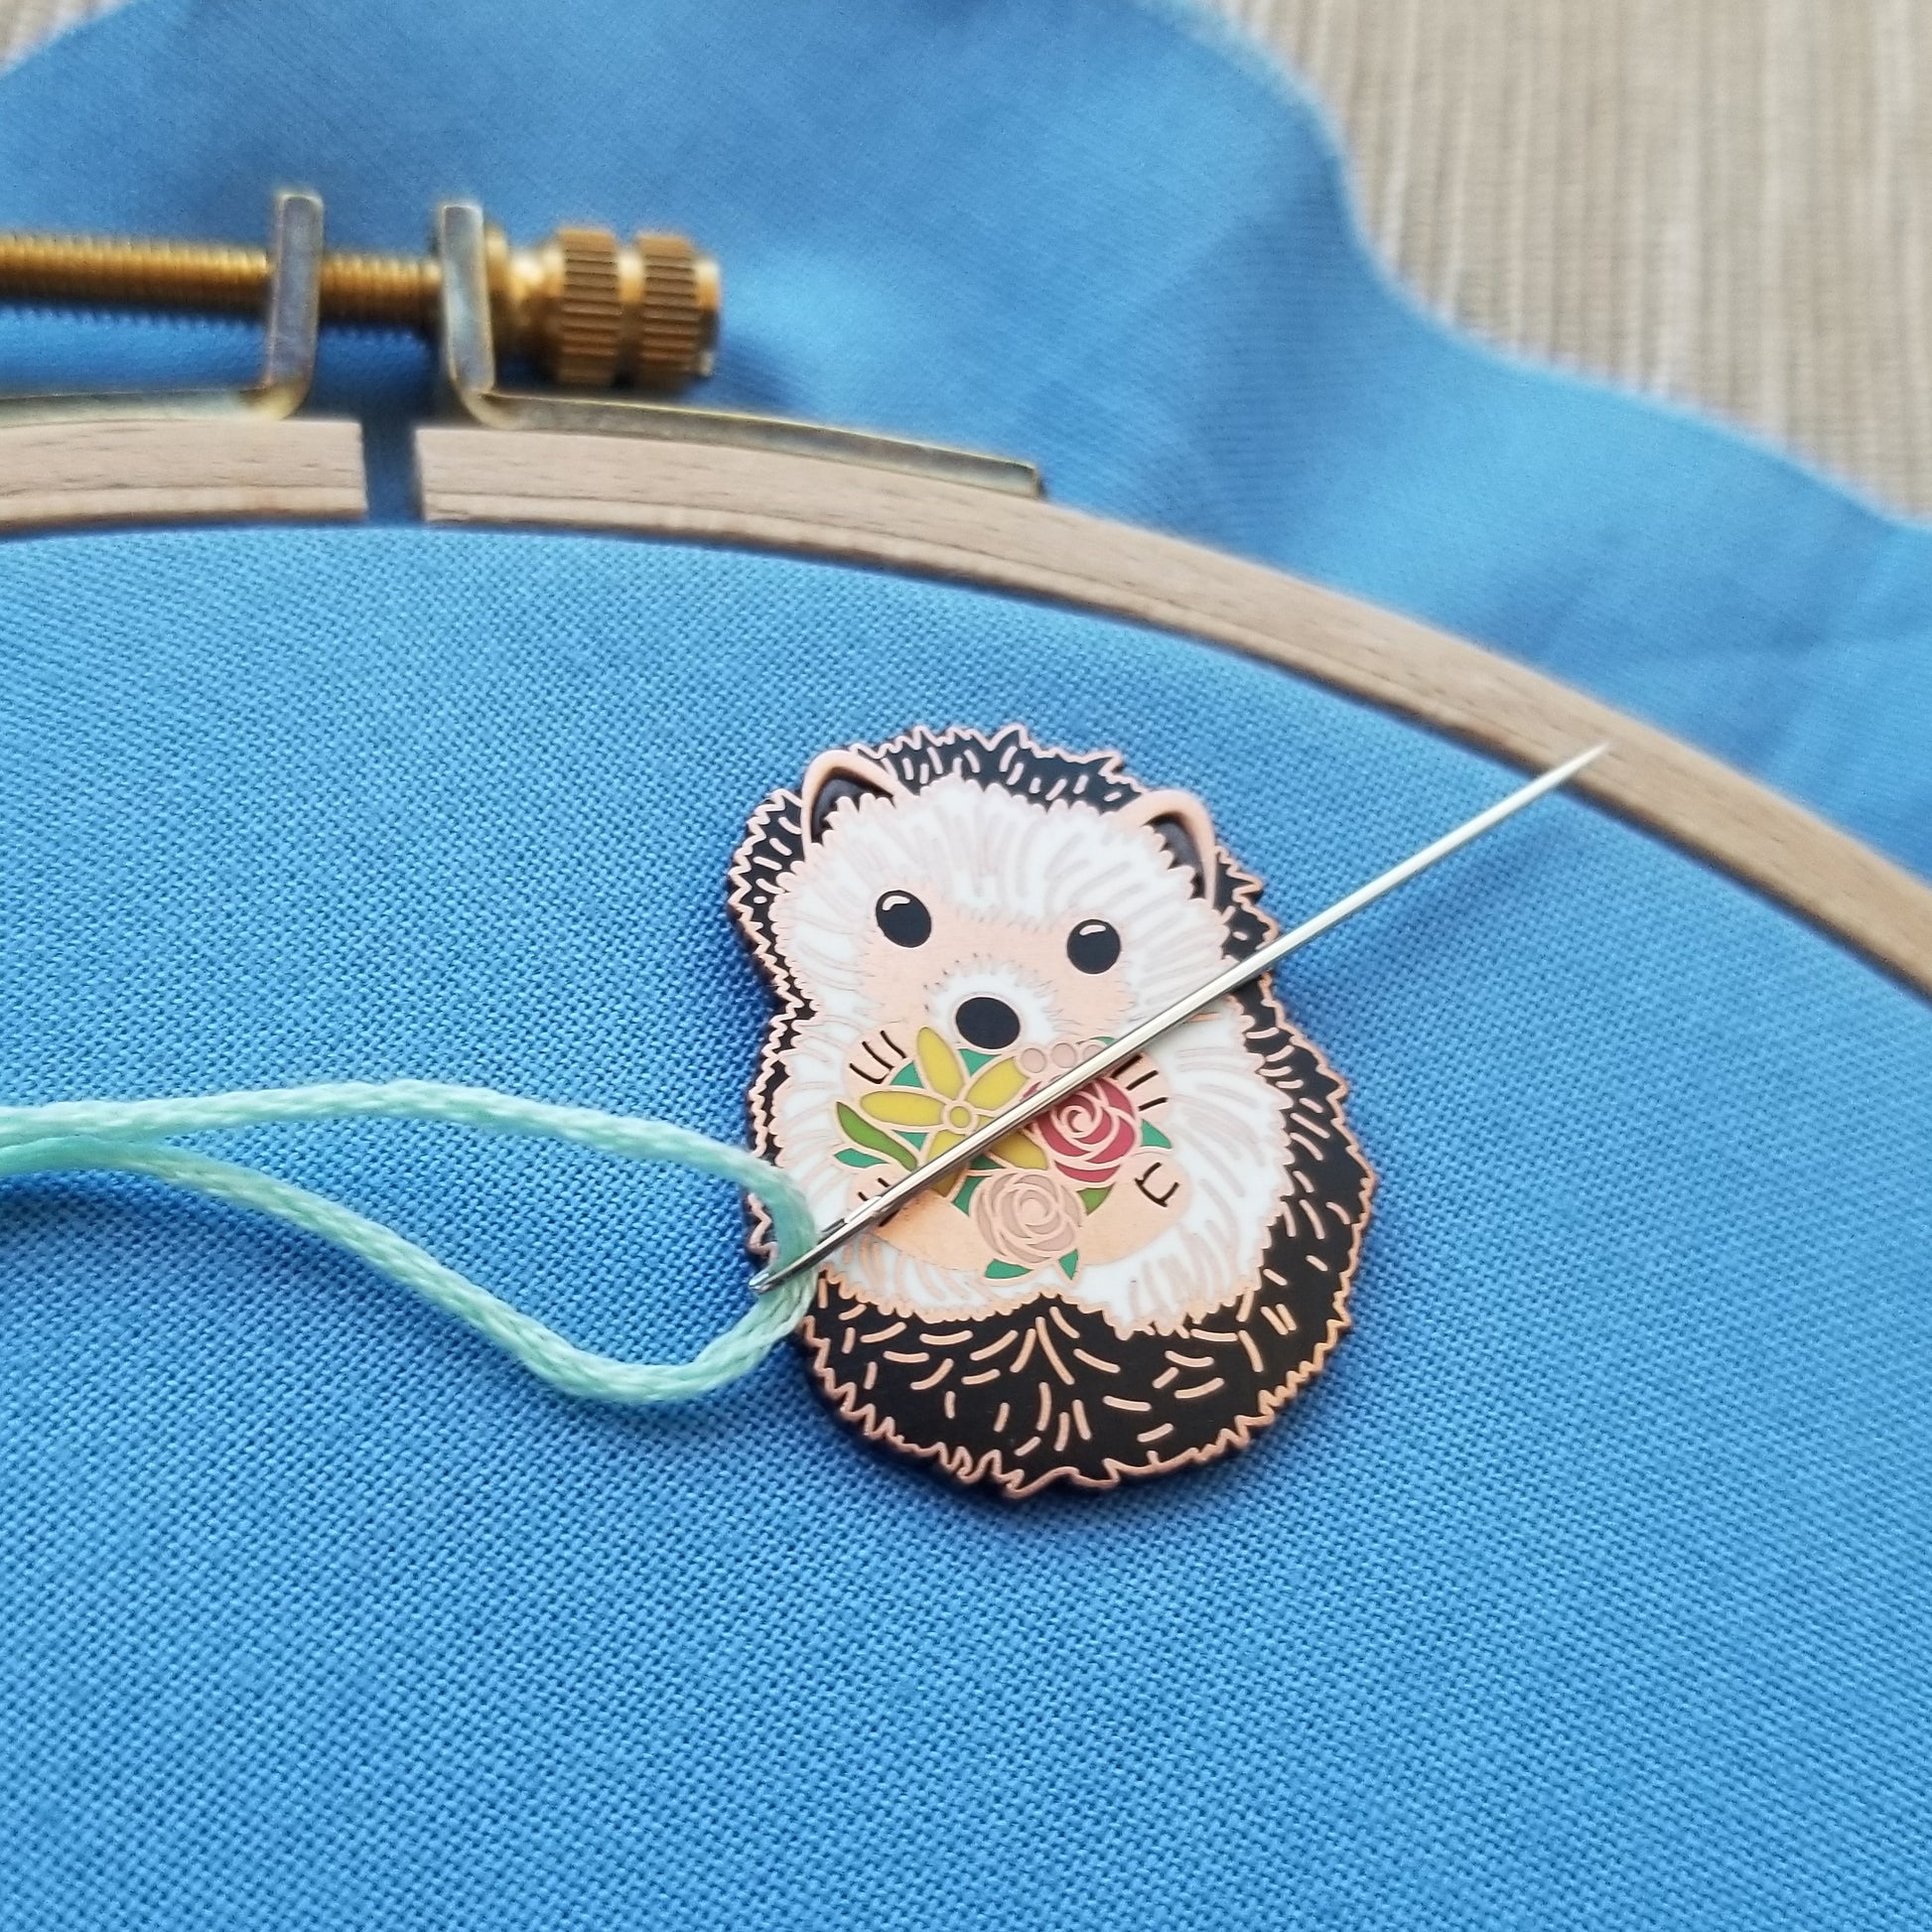 Needle Minder - Pink or Red Strawberry